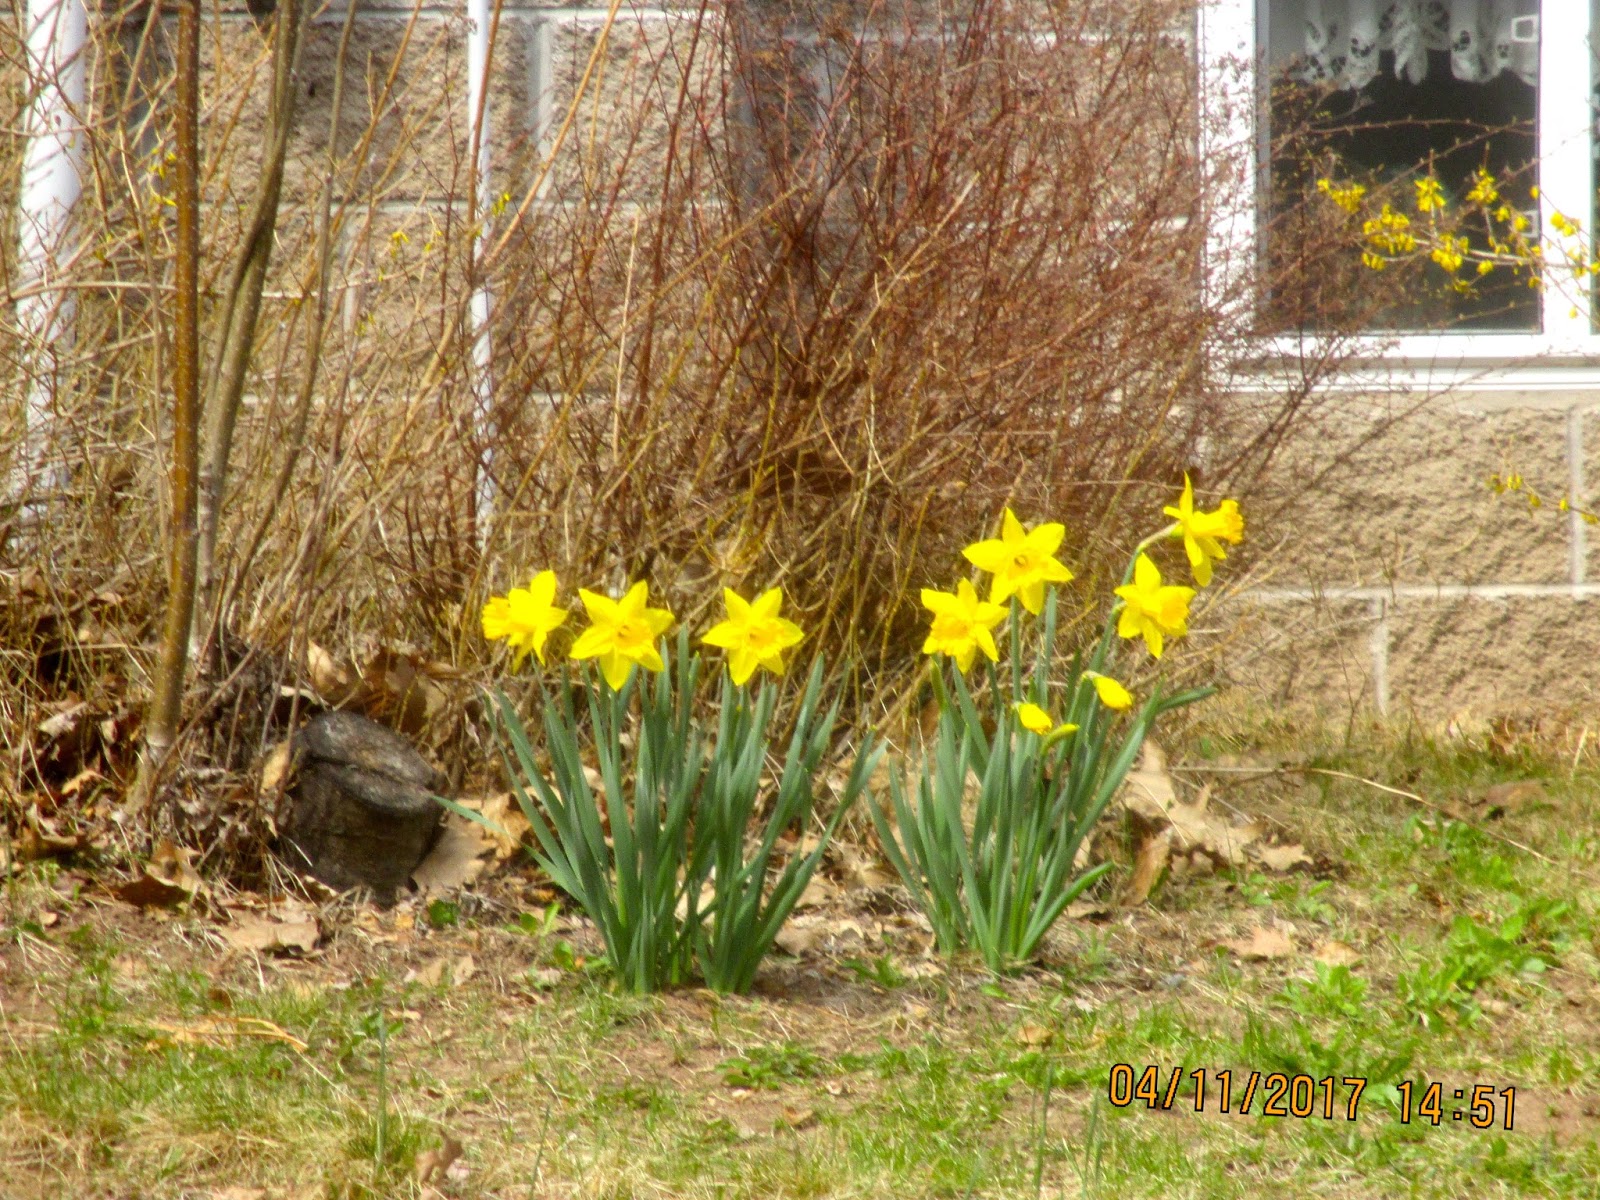 Art's Bayfield Almanac: DAFFODILS ARE BEGINNING TO BLOOM